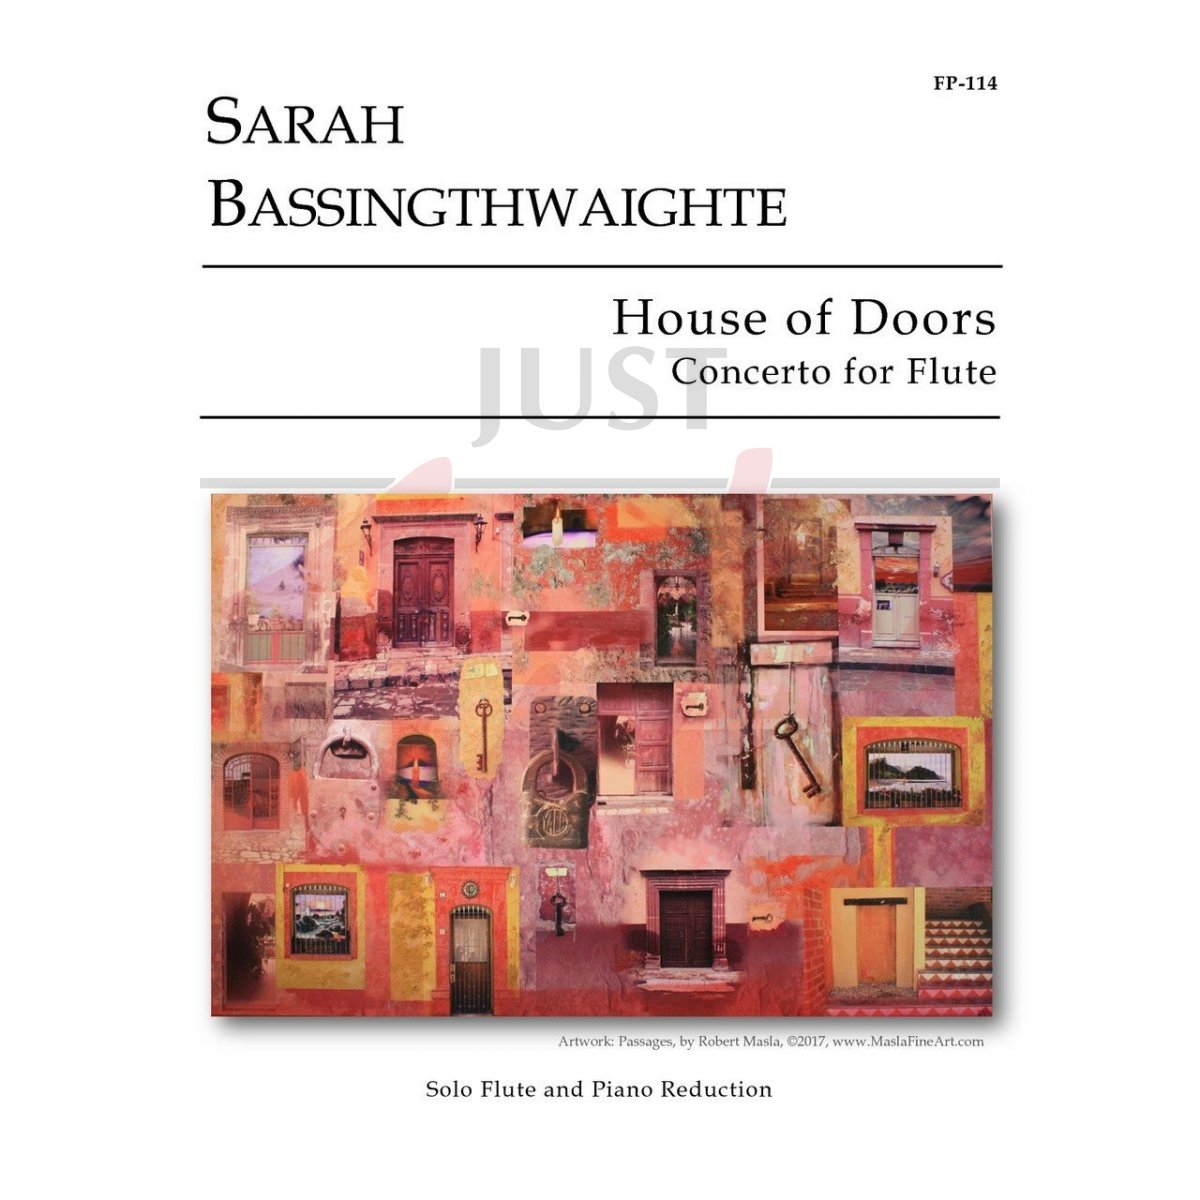 House of Doors Concerto for Flute (Piano Reduction)